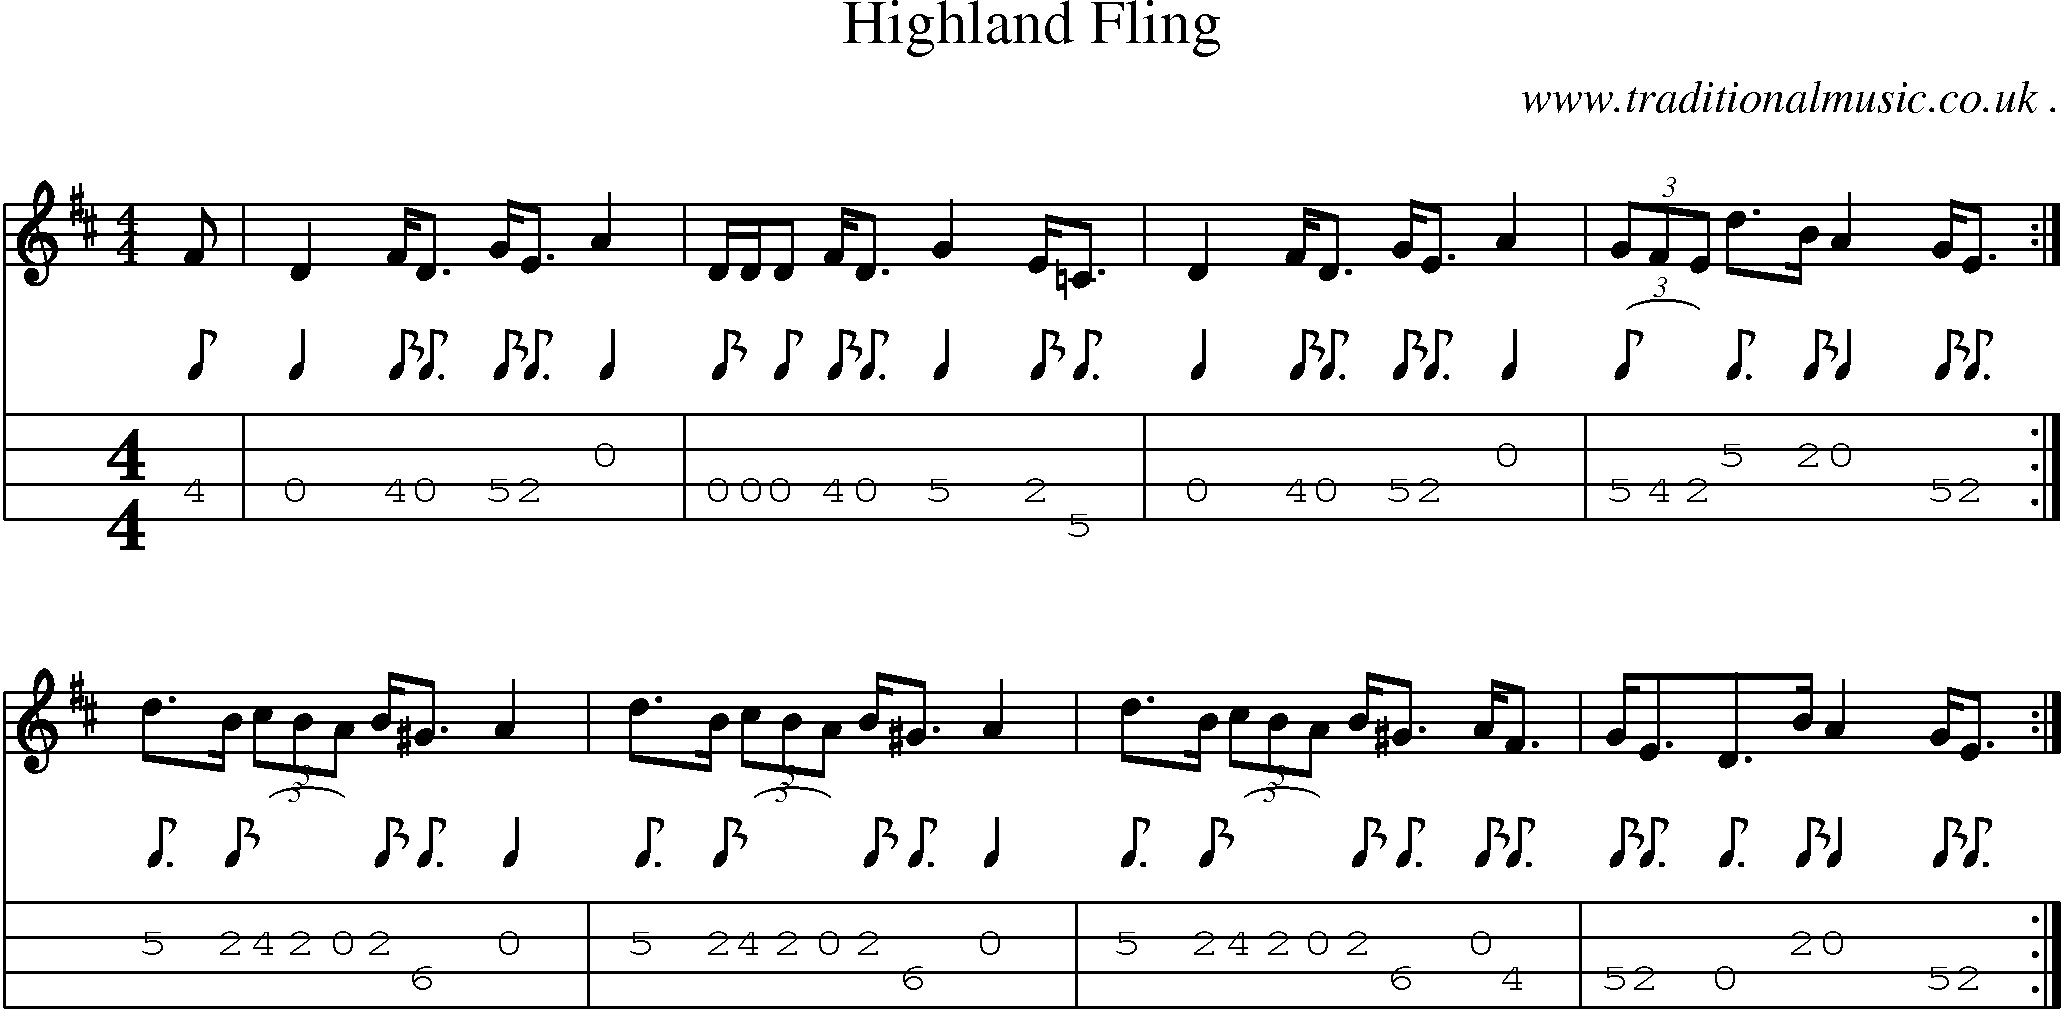 Sheet-music  score, Chords and Mandolin Tabs for Highland Fling